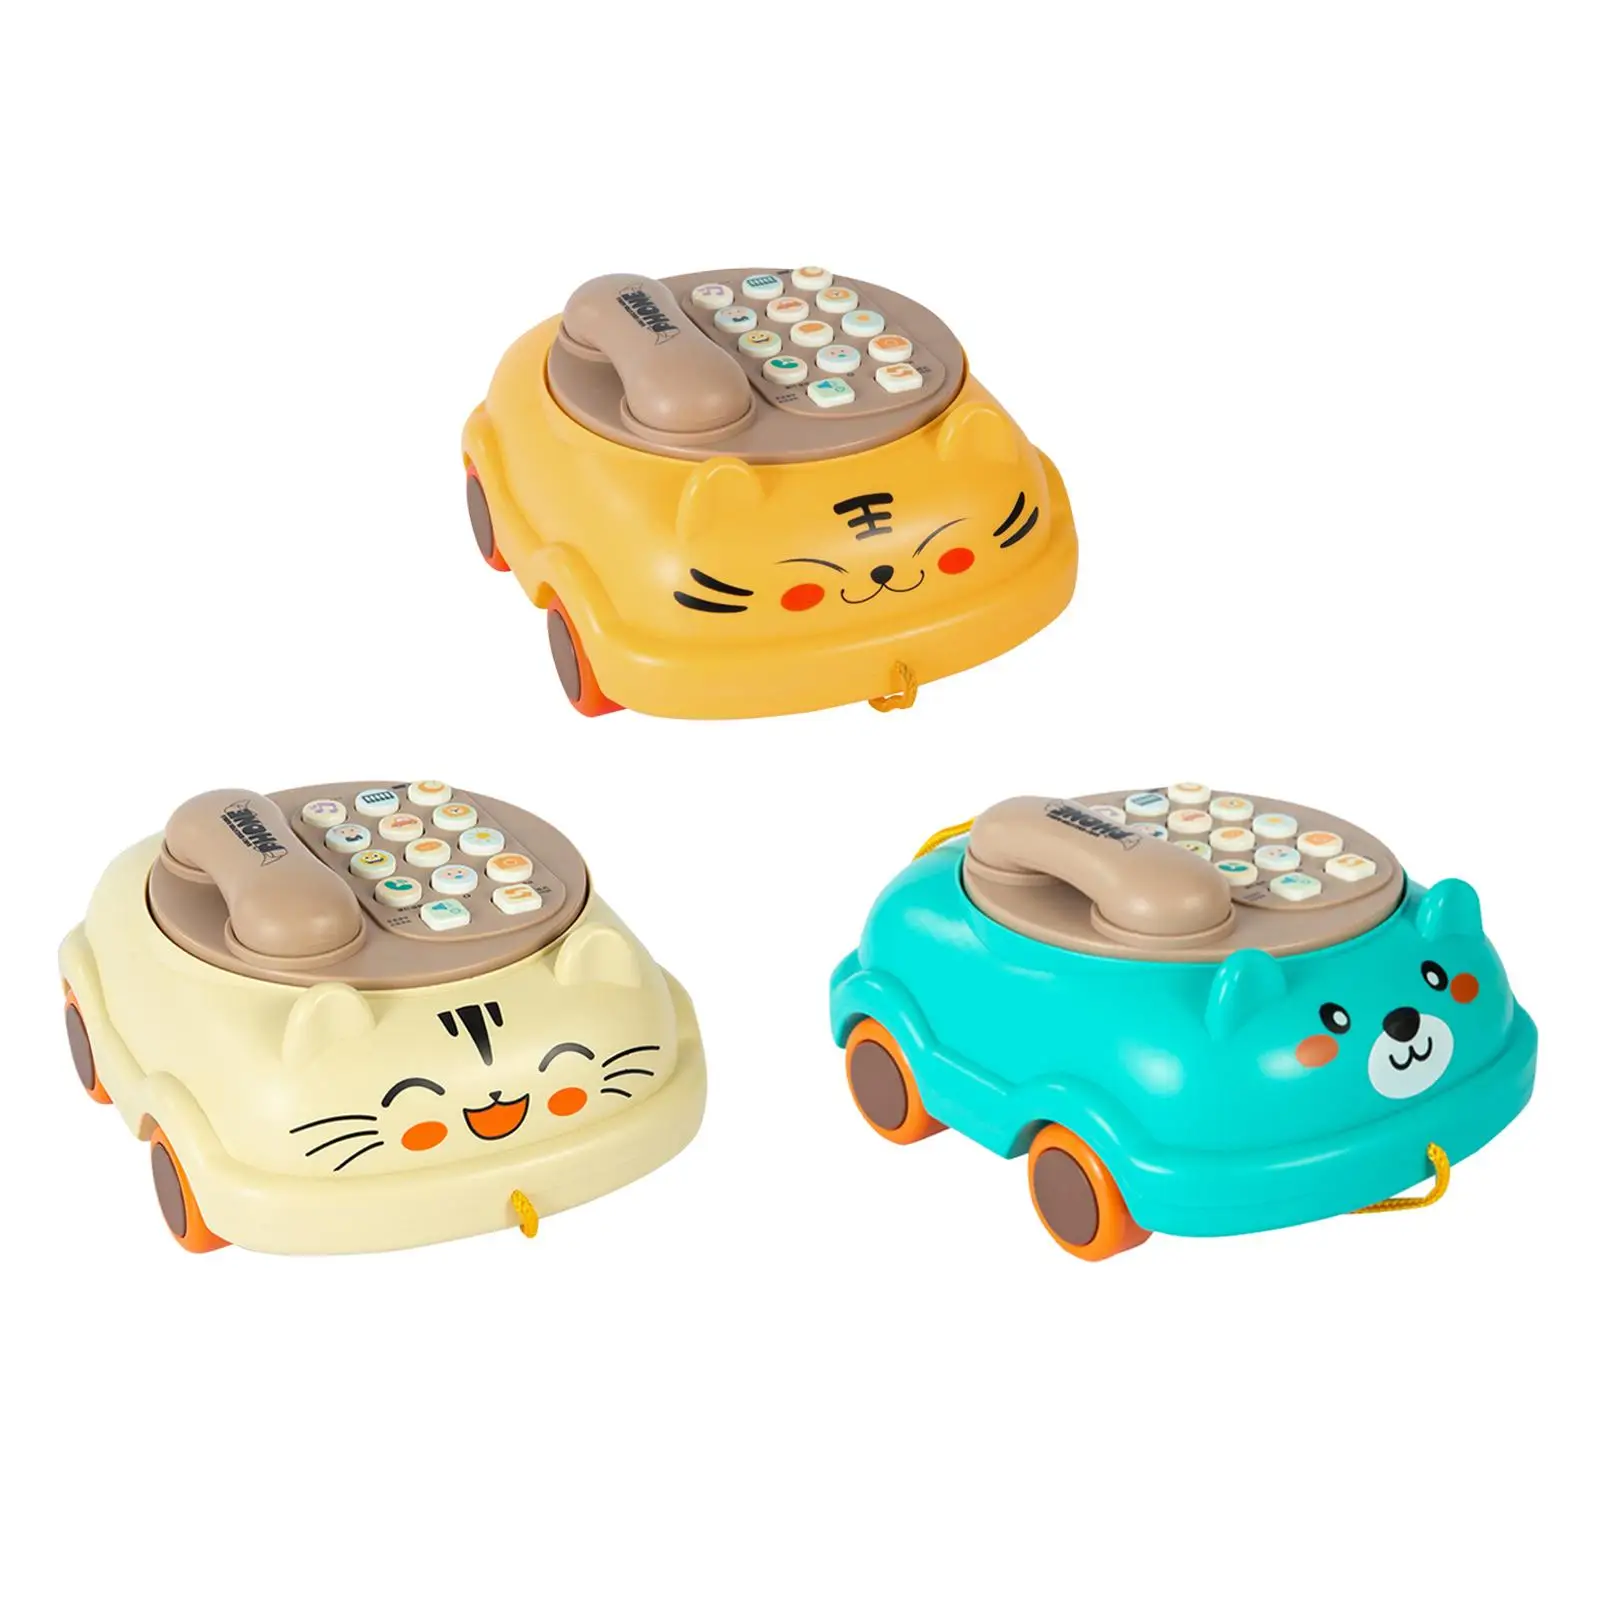 Baby Toy Phone Pretend Phone Baby Musical Toy Parent Child Interactive Toy for 3 Years Old Girl Creative Gift Boy Children